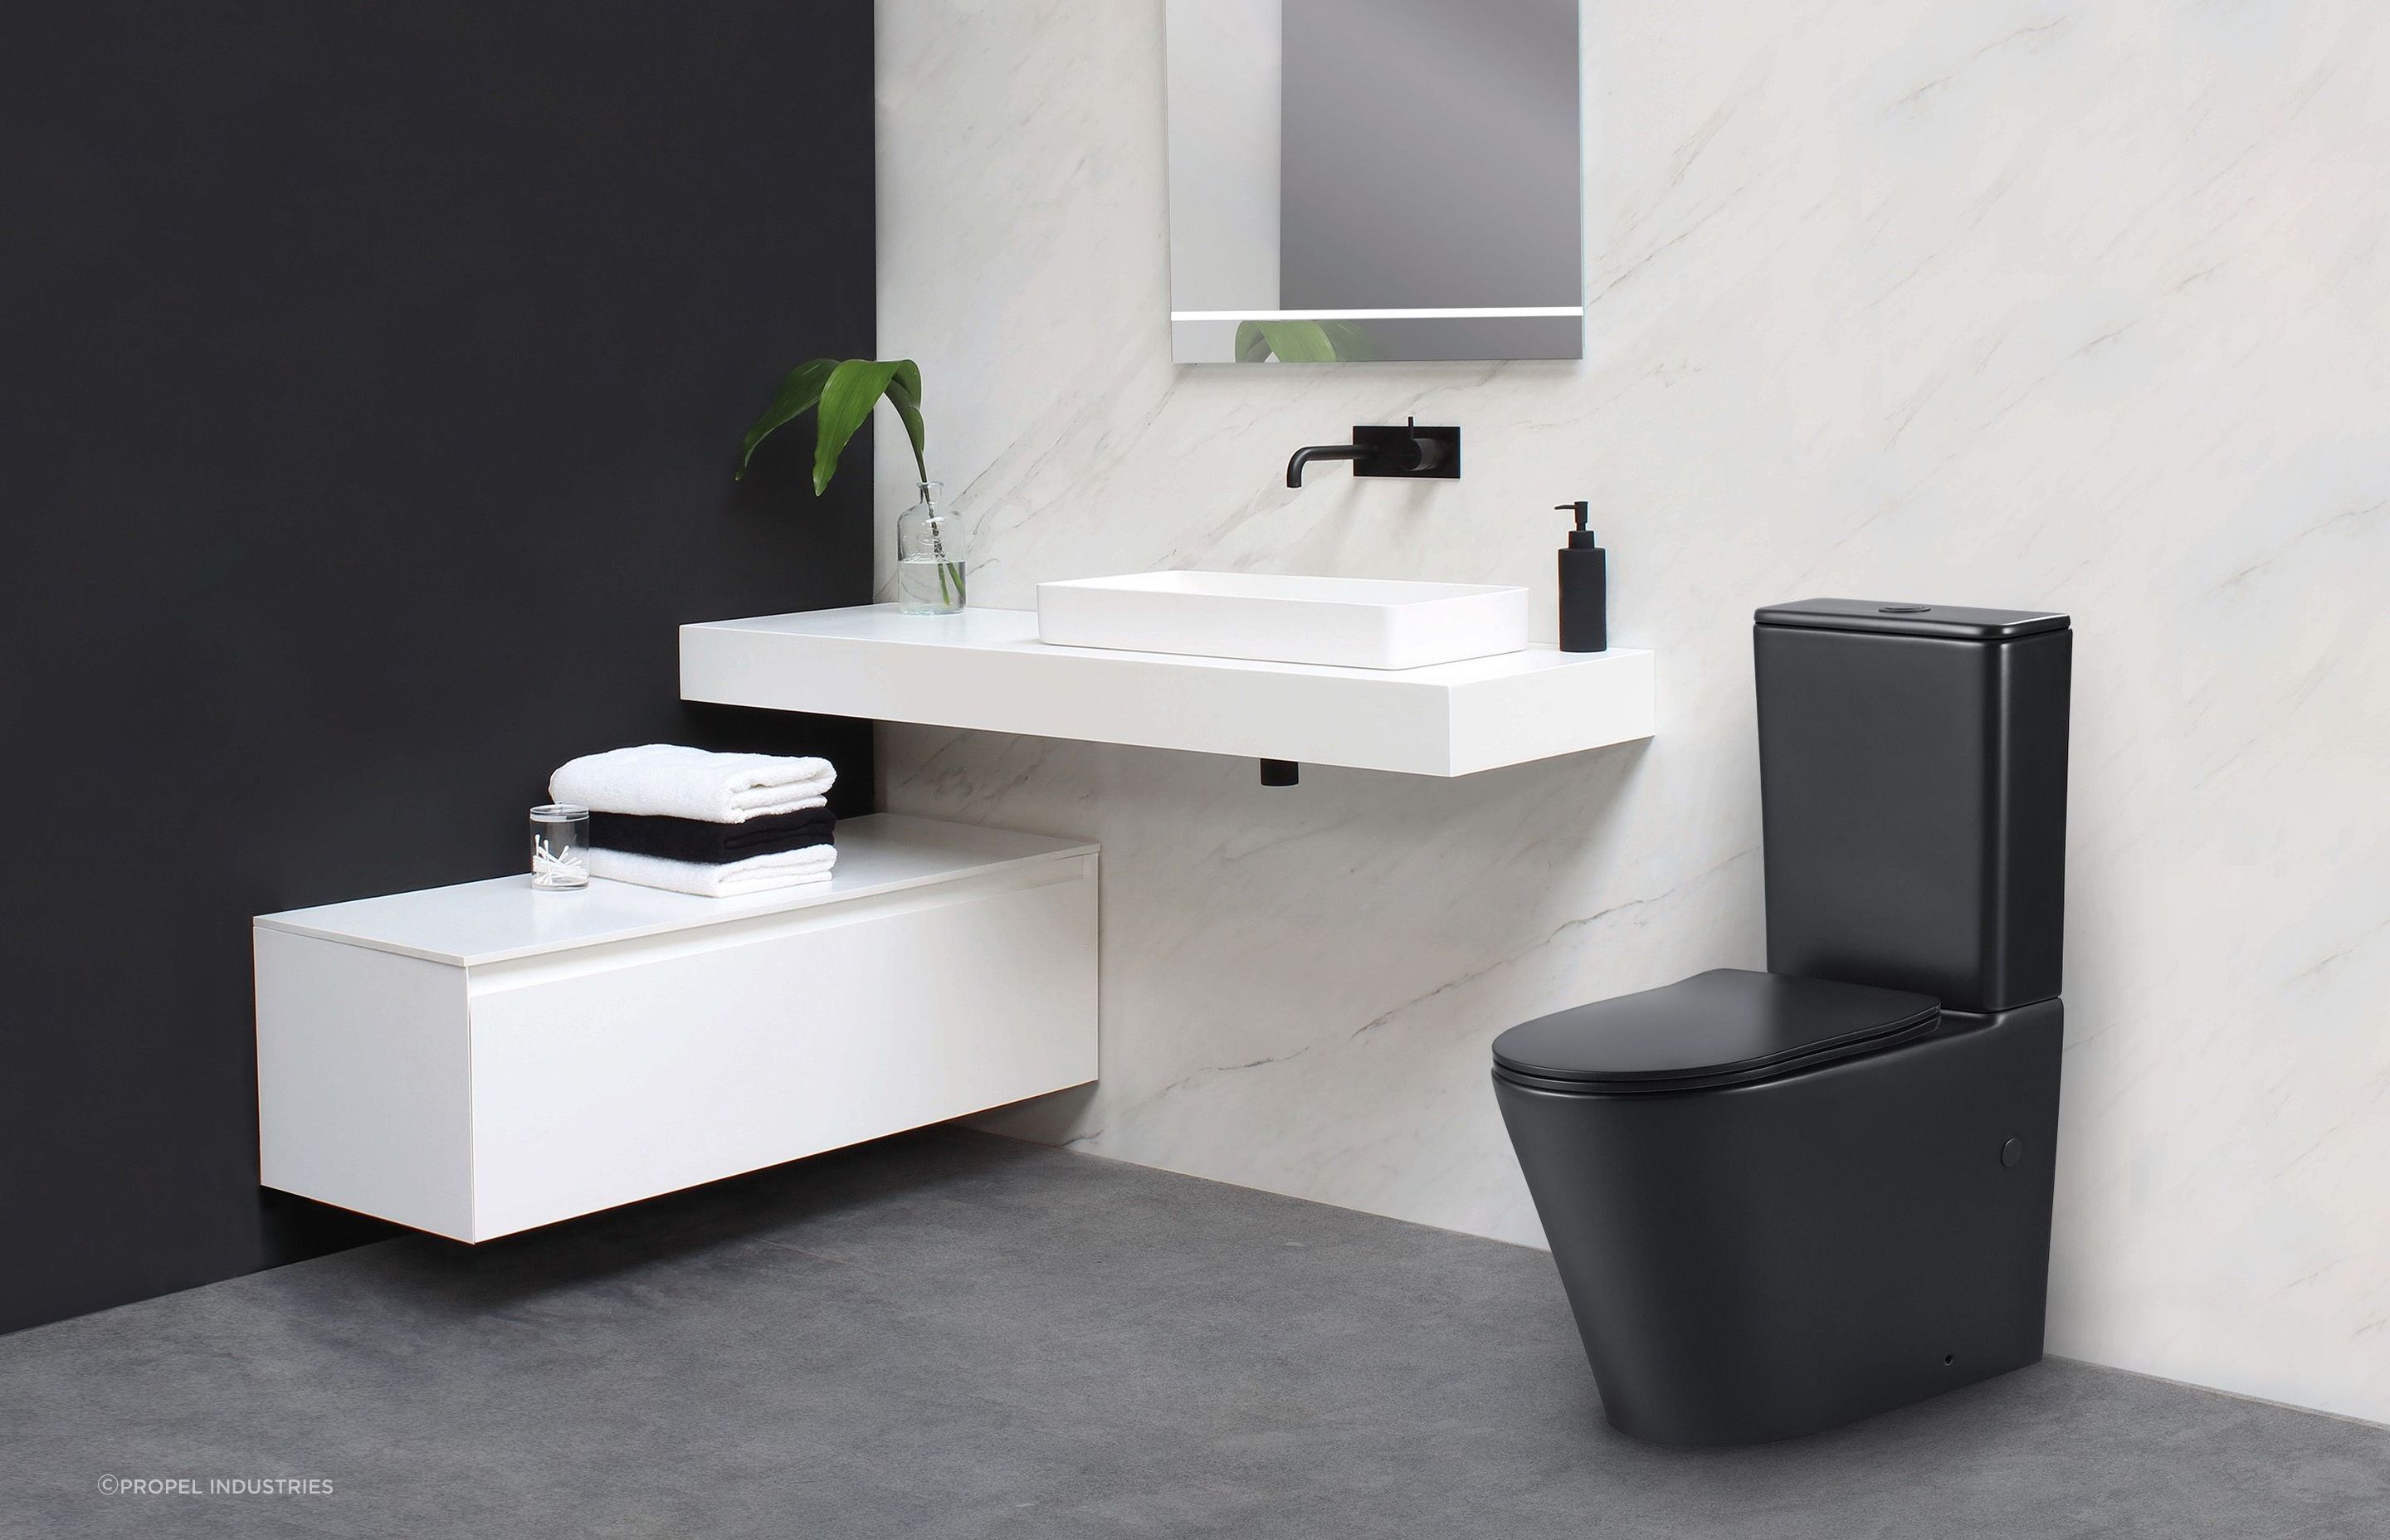 A refined profile and a powerful yet quiet flushing system makes the Tornado Zero Rim Toilet Suite an appealing choice.